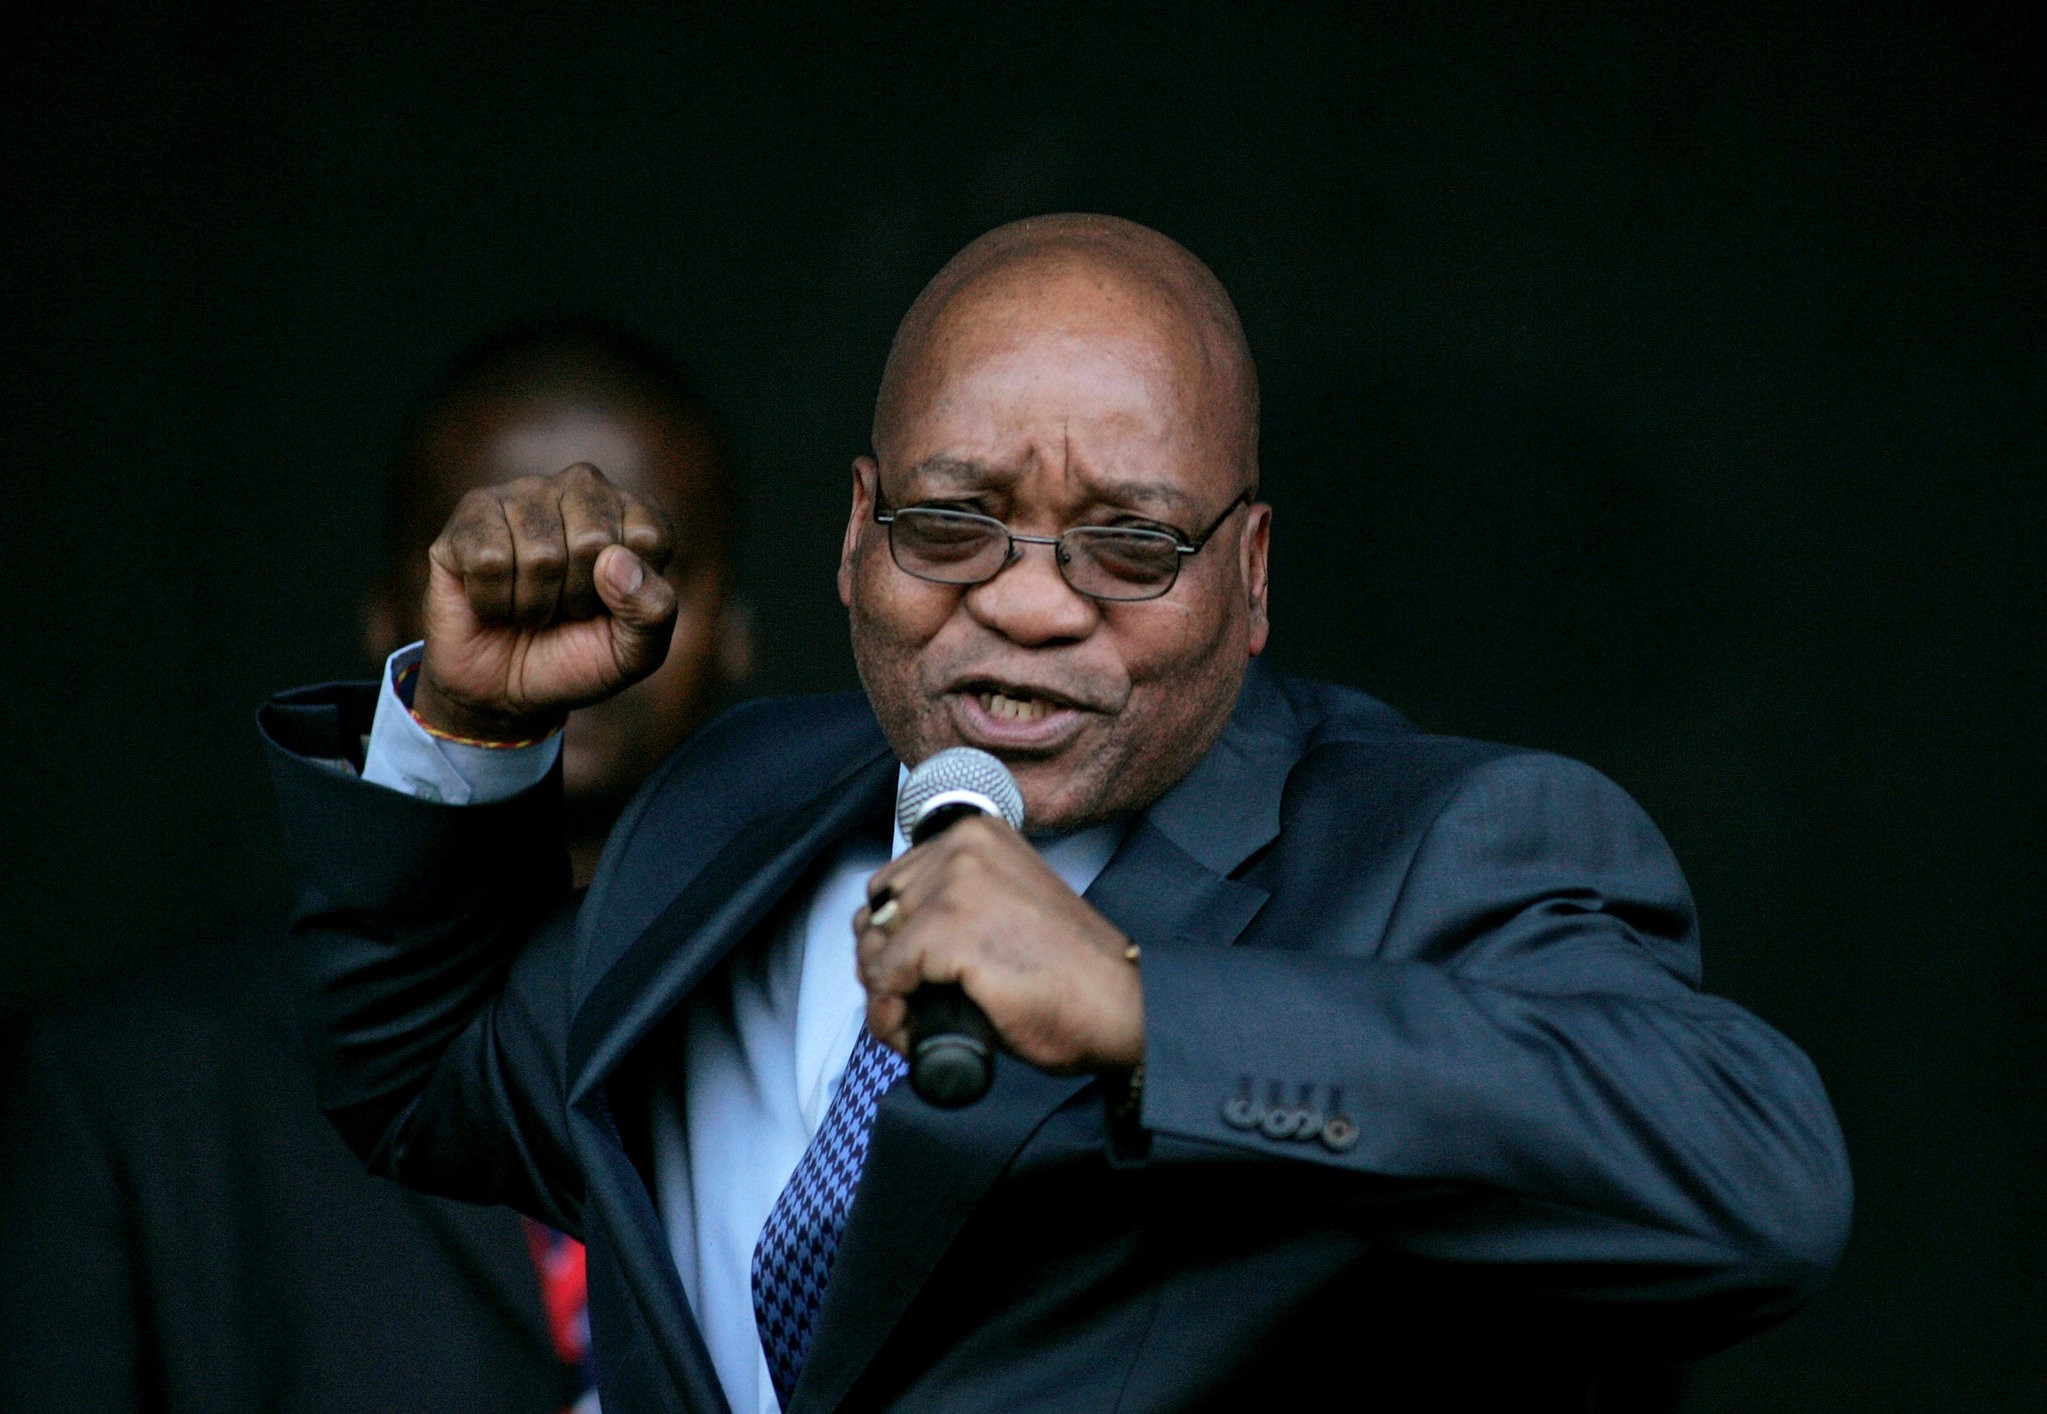 Jacob Zuma, leader of South Africa's ruling African National Congress (ANC), sings for his supporters at the Pietermaritzburg high court outside Durban August 4, 2008. (REUTERS Photo)